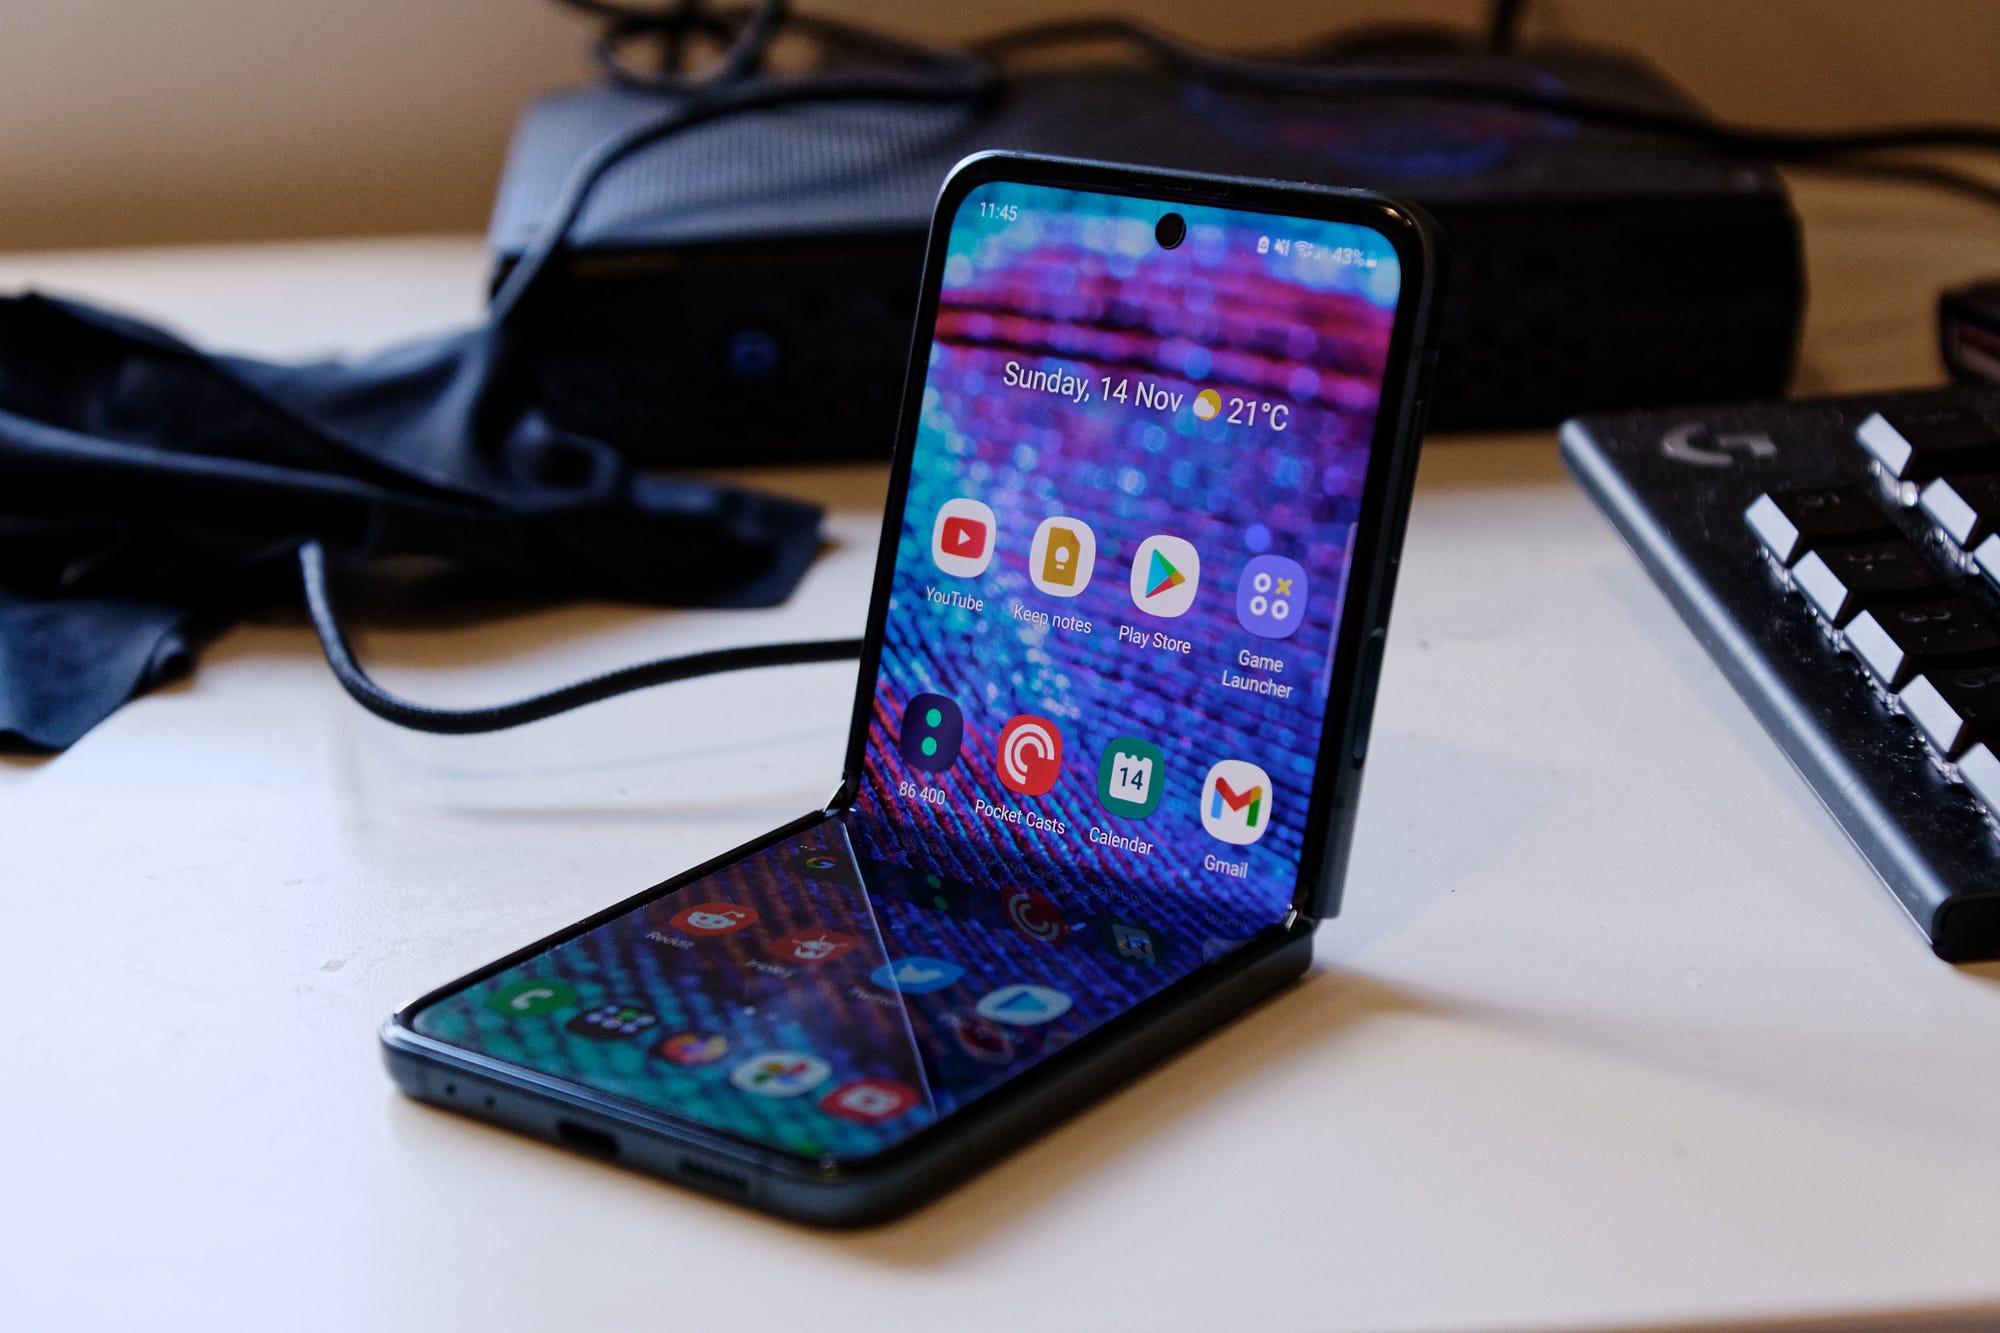 Samsung Galaxy Z Flip 3 review: The first cheaper foldable phone